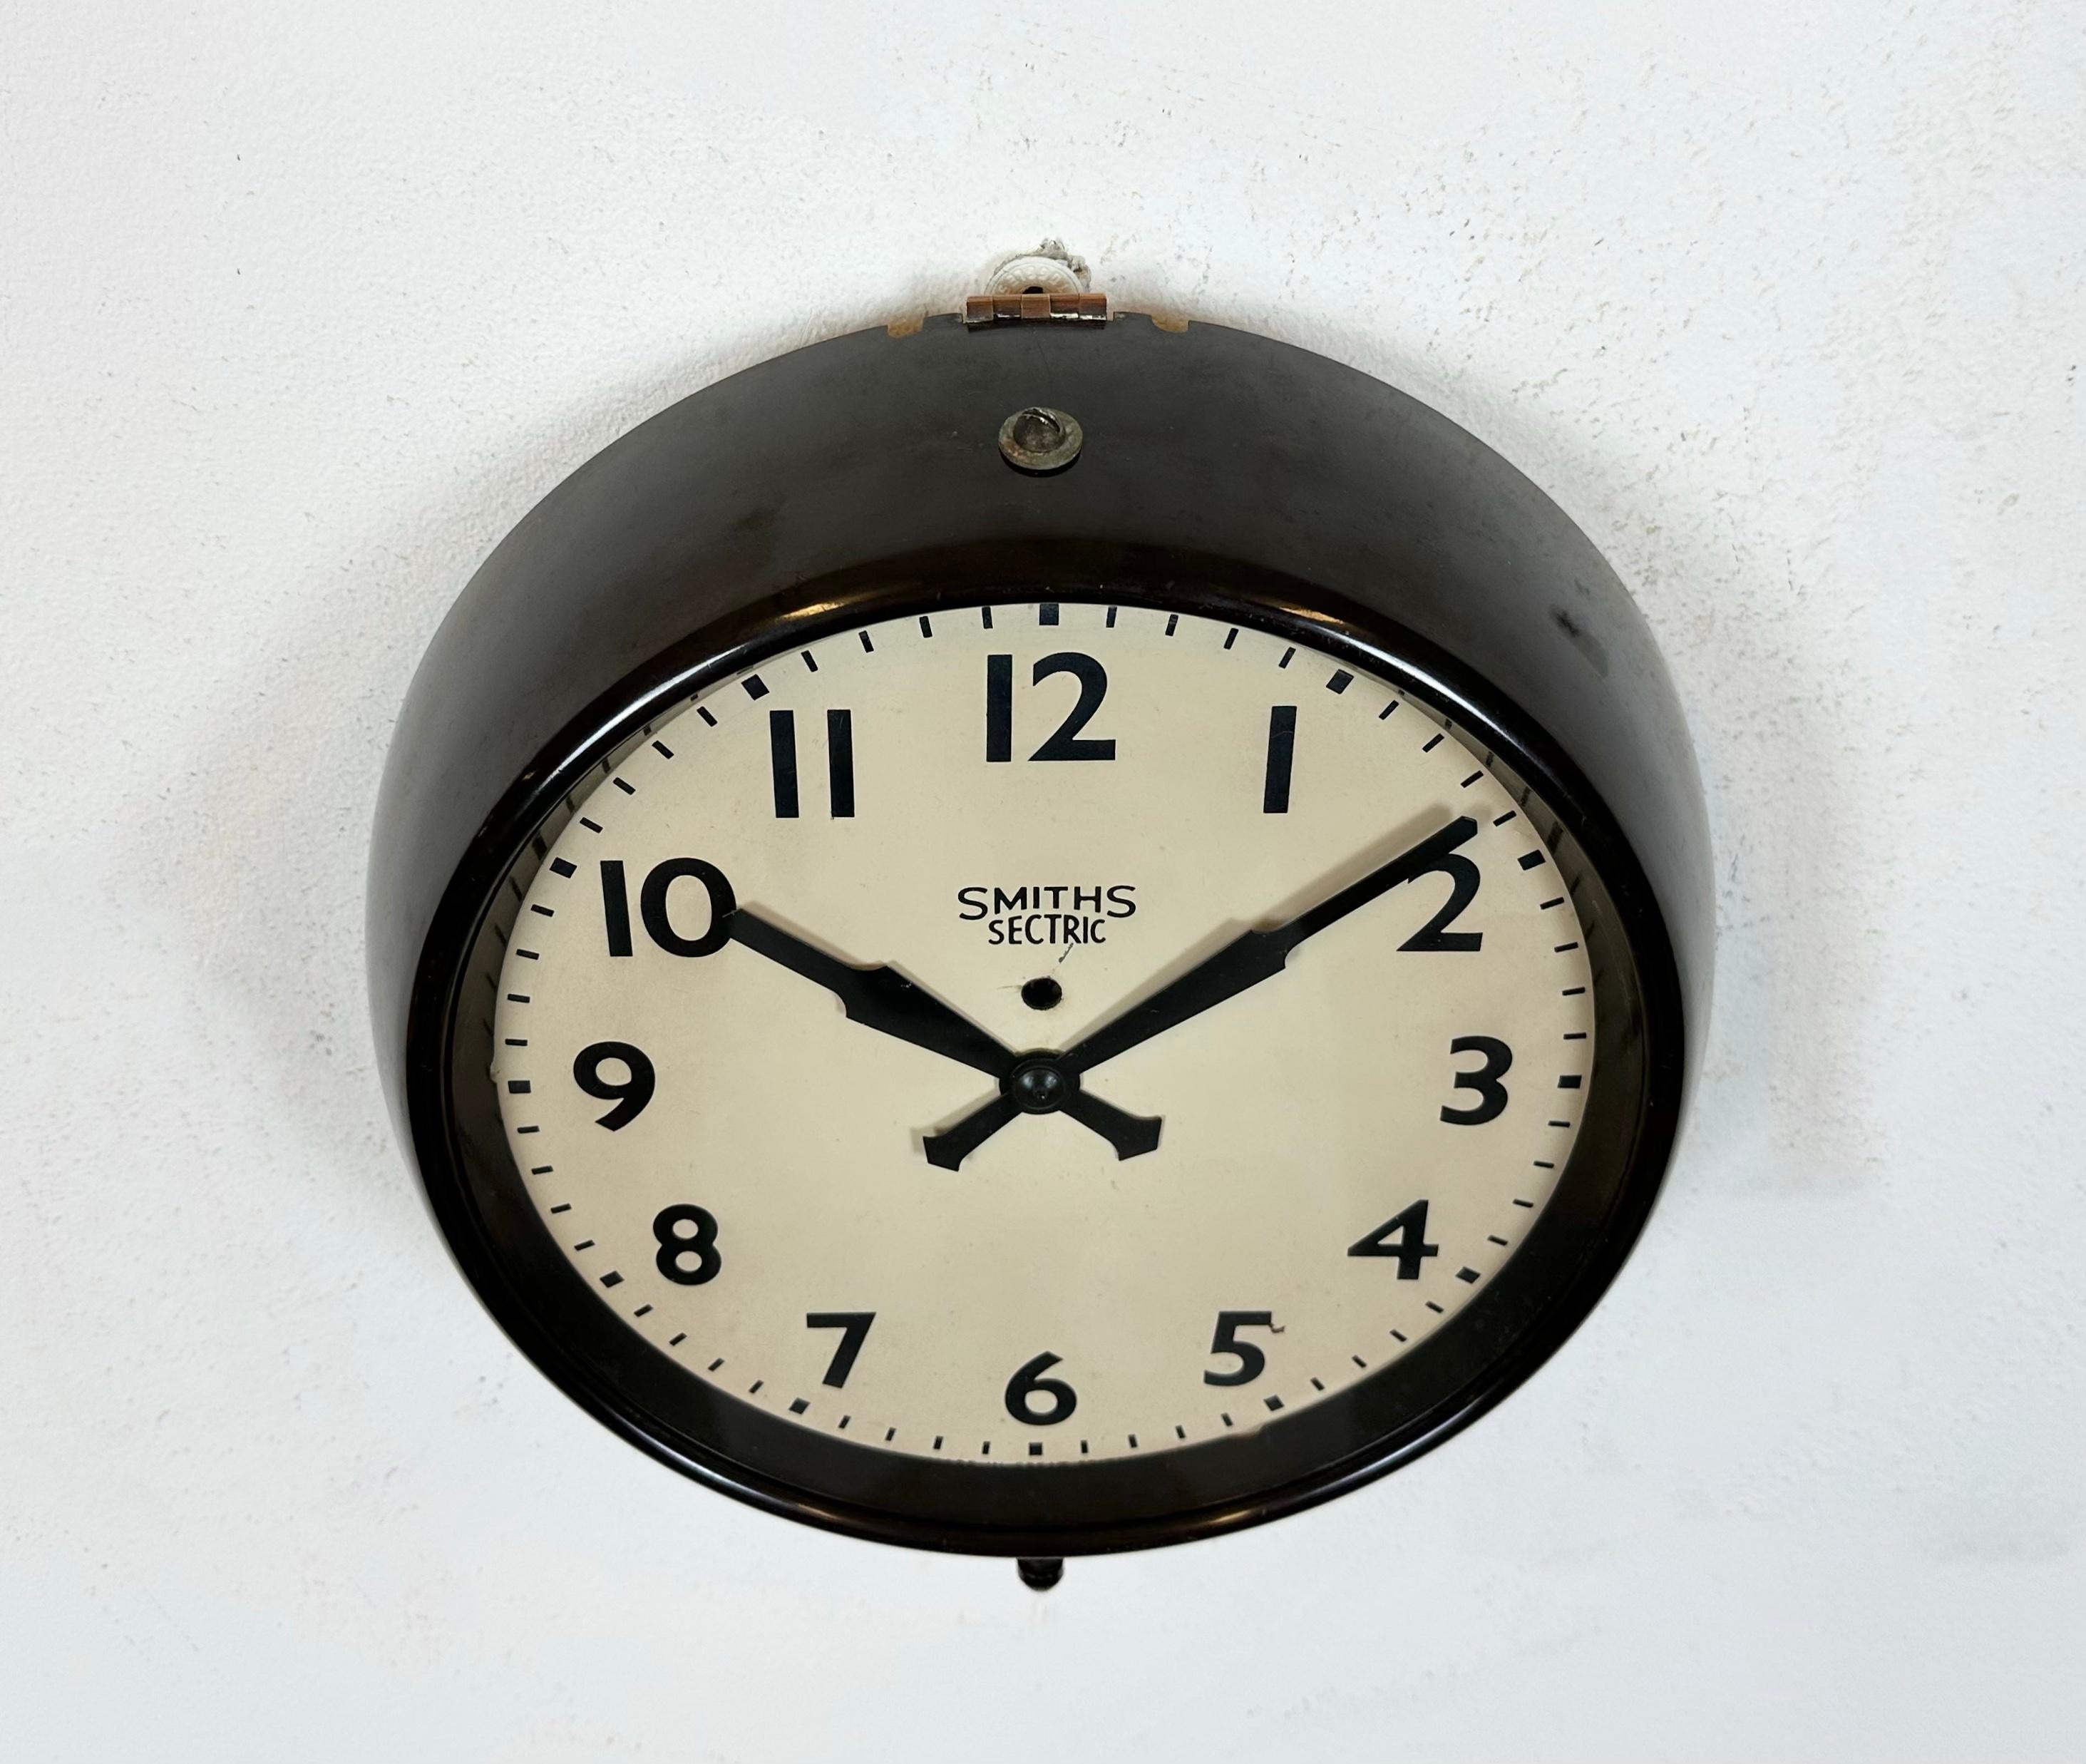 Industrial Vintage Brown Bakelite Electric Wall Clock from Smiths Sectric, 1950s